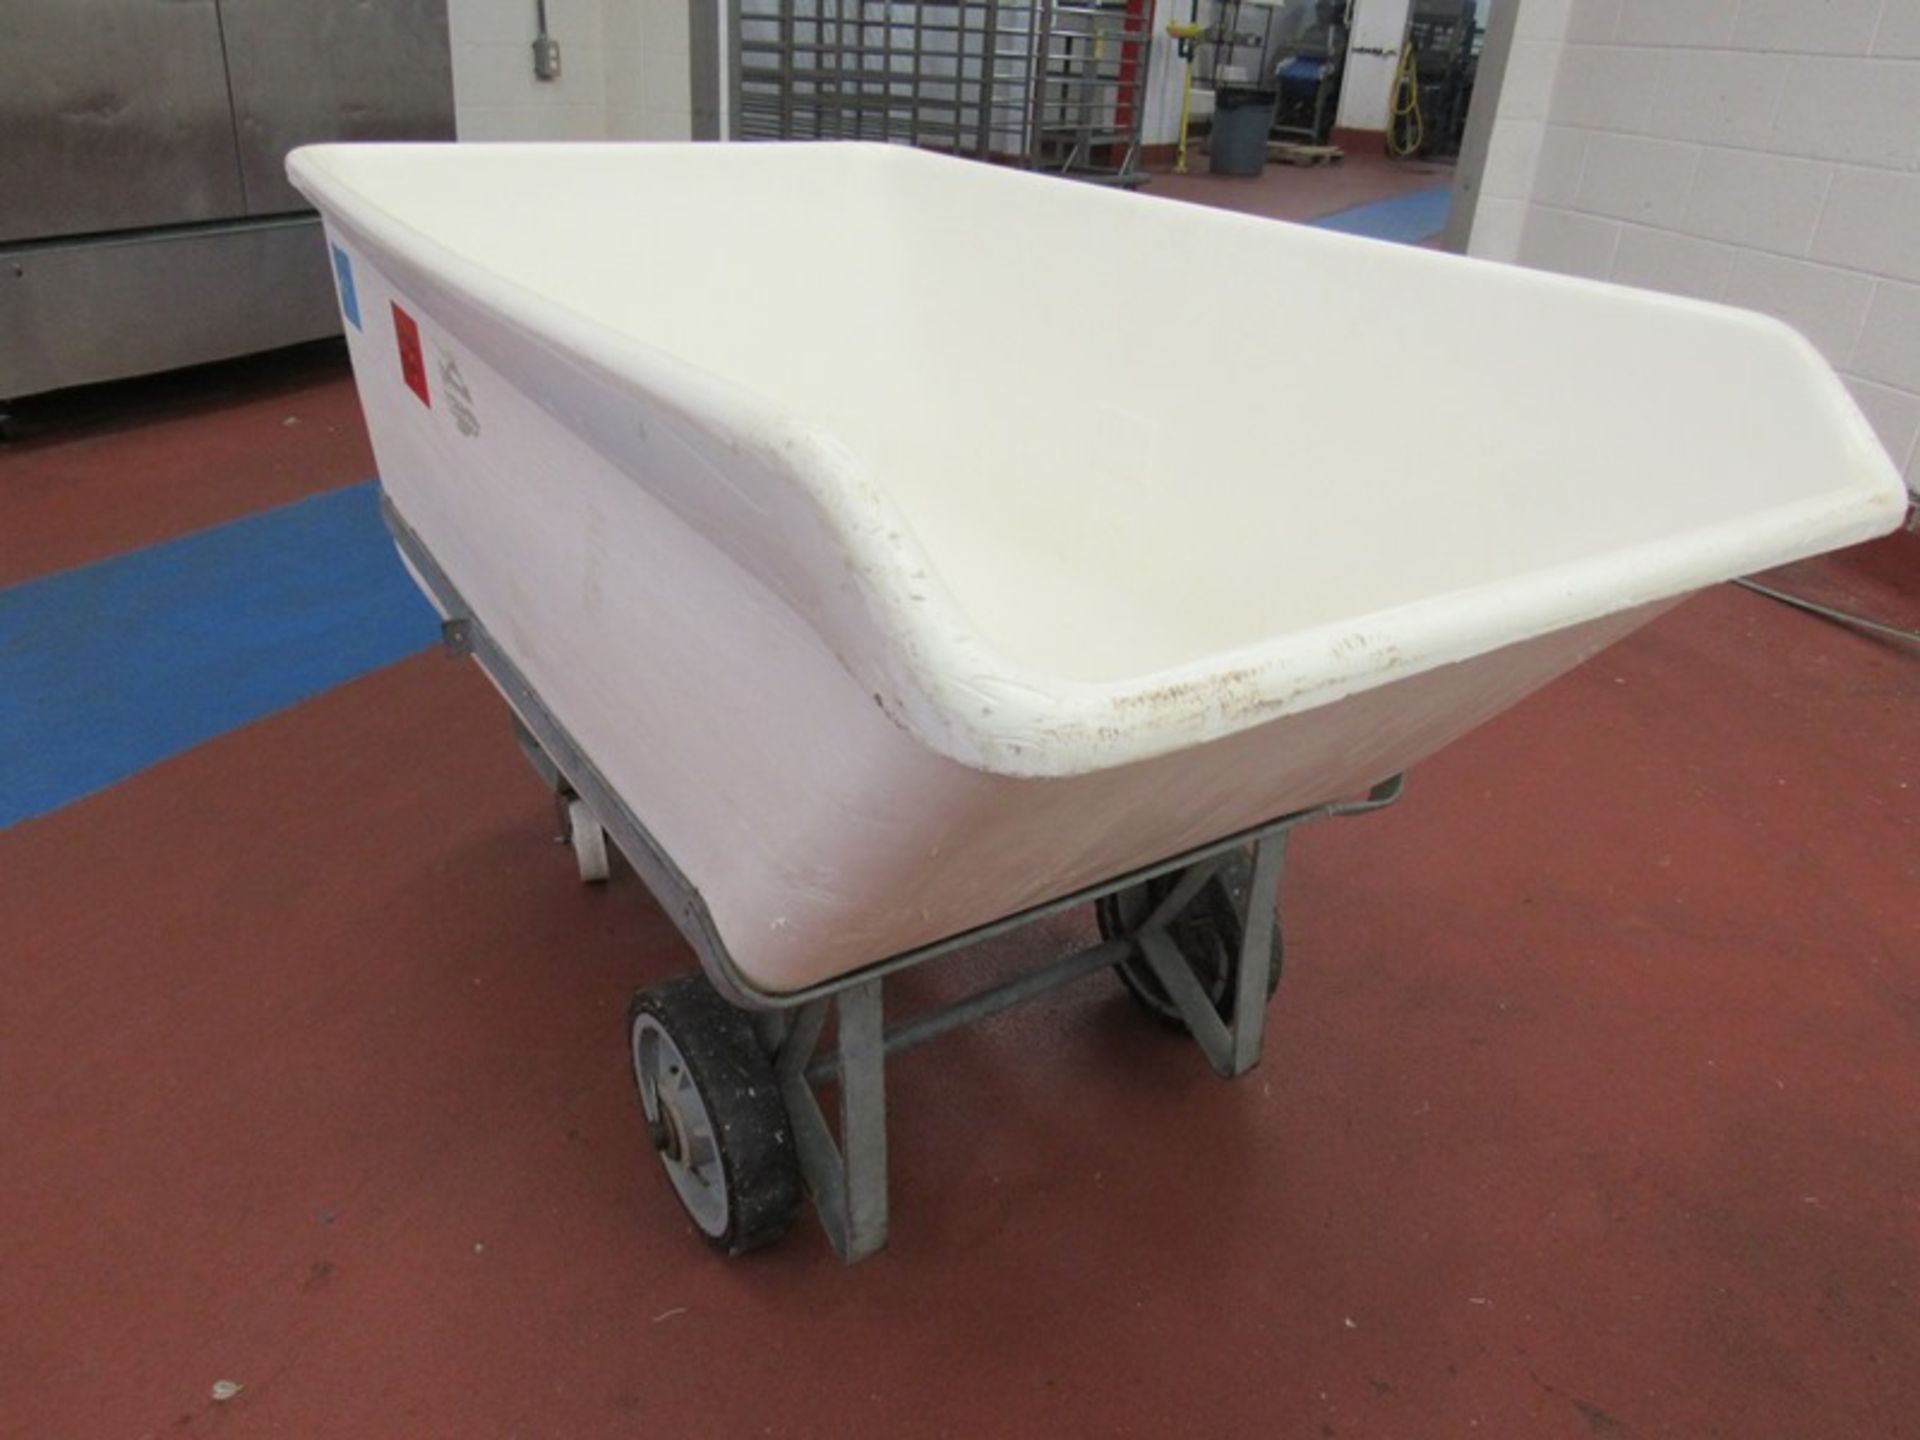 Remco Mdl. 6901 Plastic Food Totes on stainless steel cart, 33" W X 54" L X 20" D (Required - Image 3 of 3